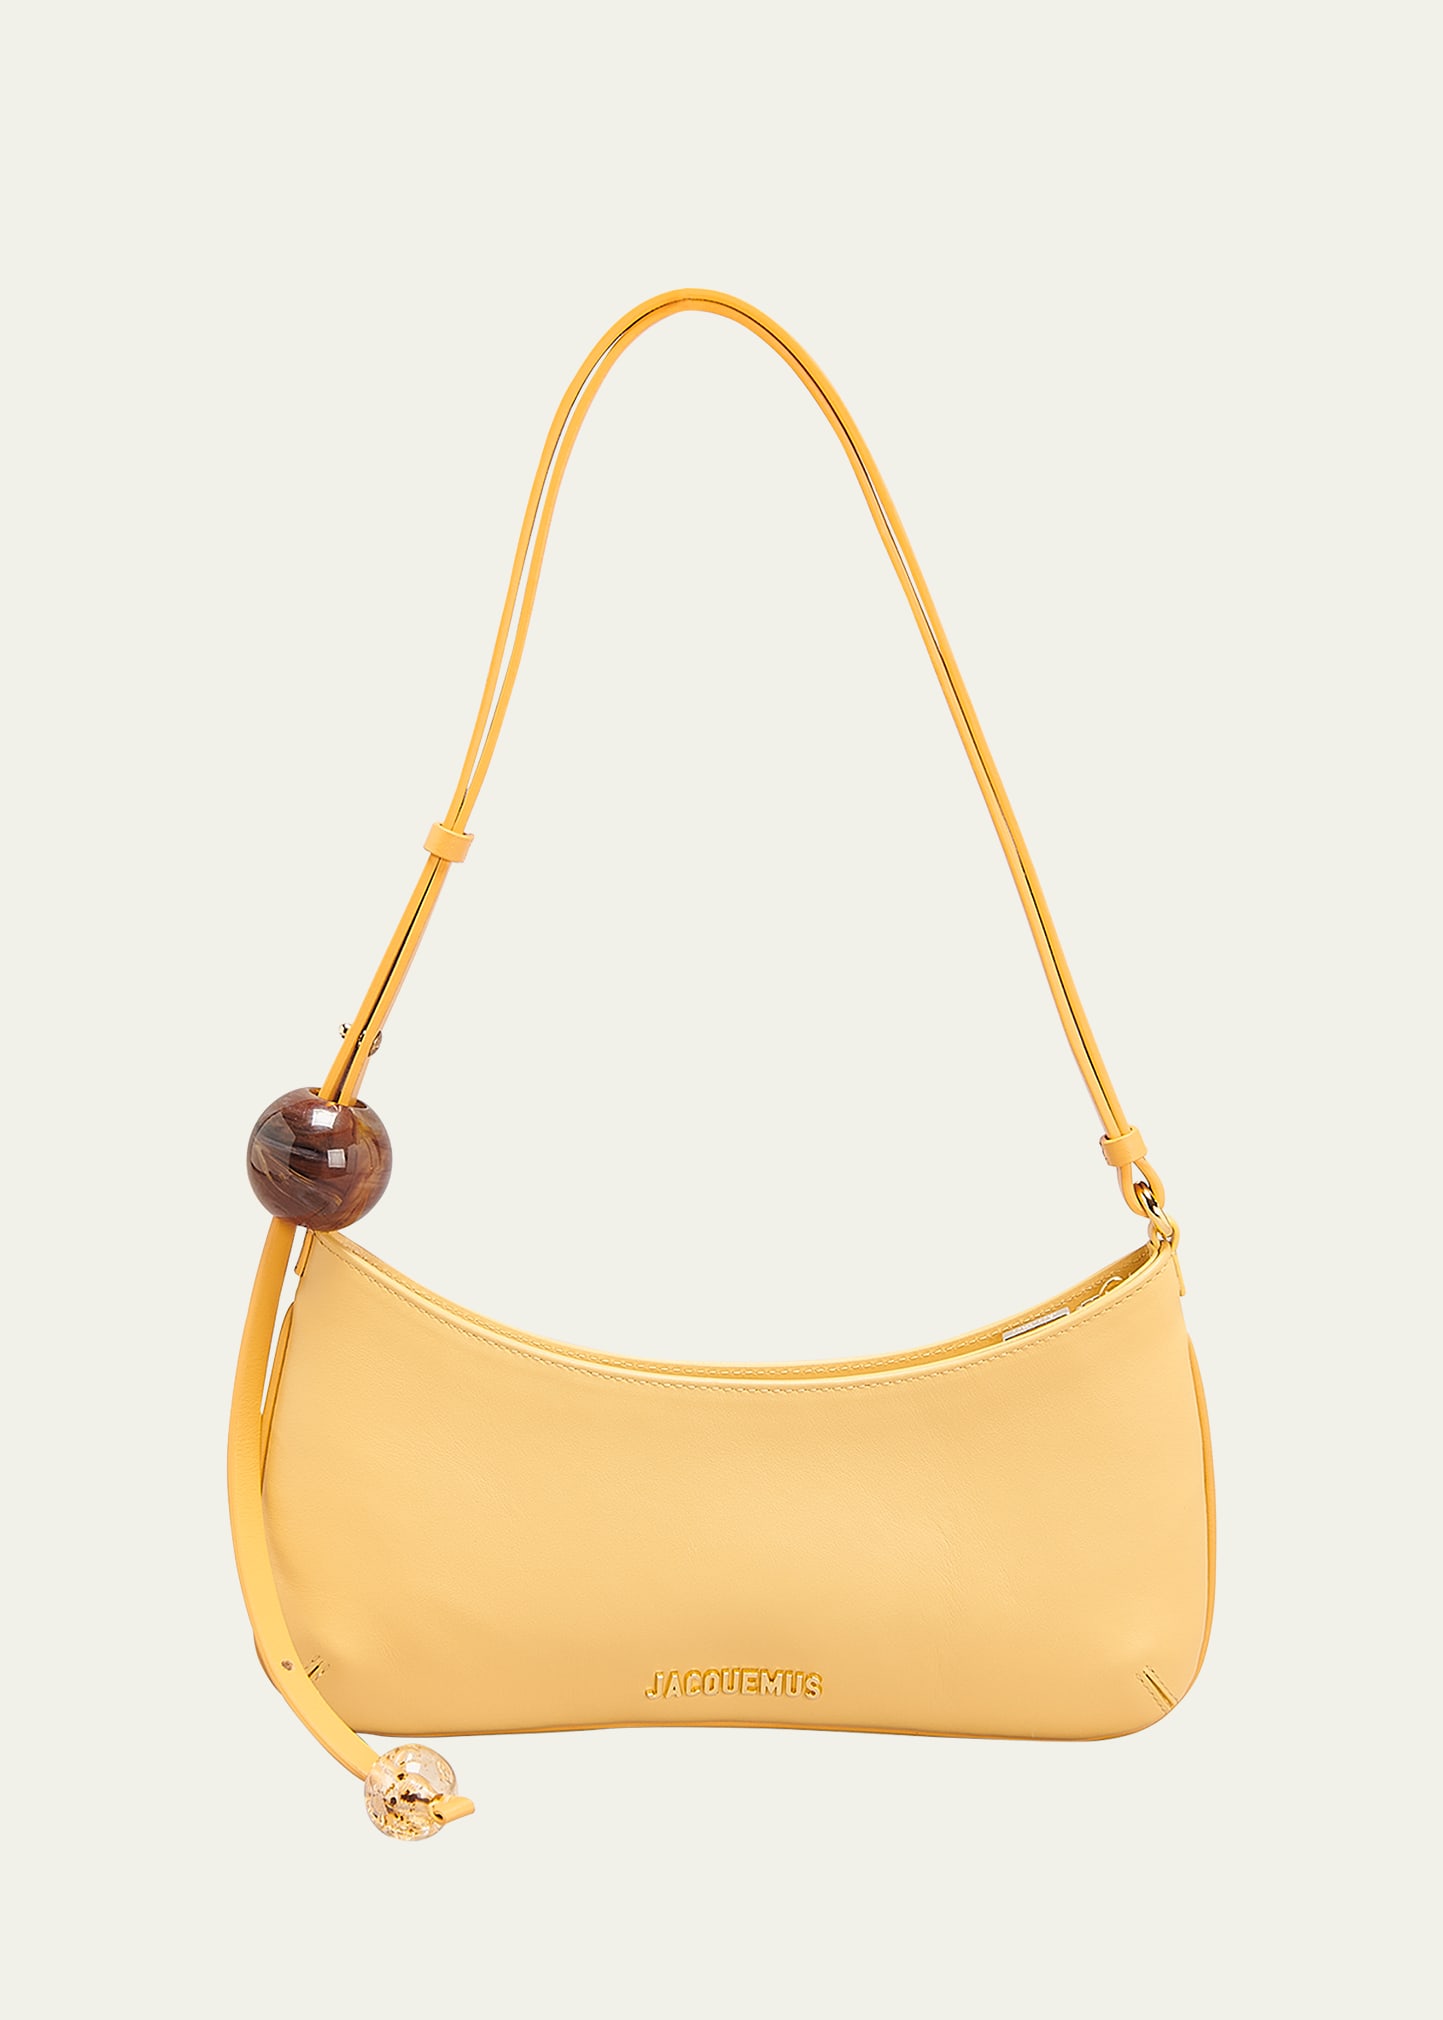 Jacquemus Le Bisou Perle Leather Shoulder Bag In Dusty Yellow